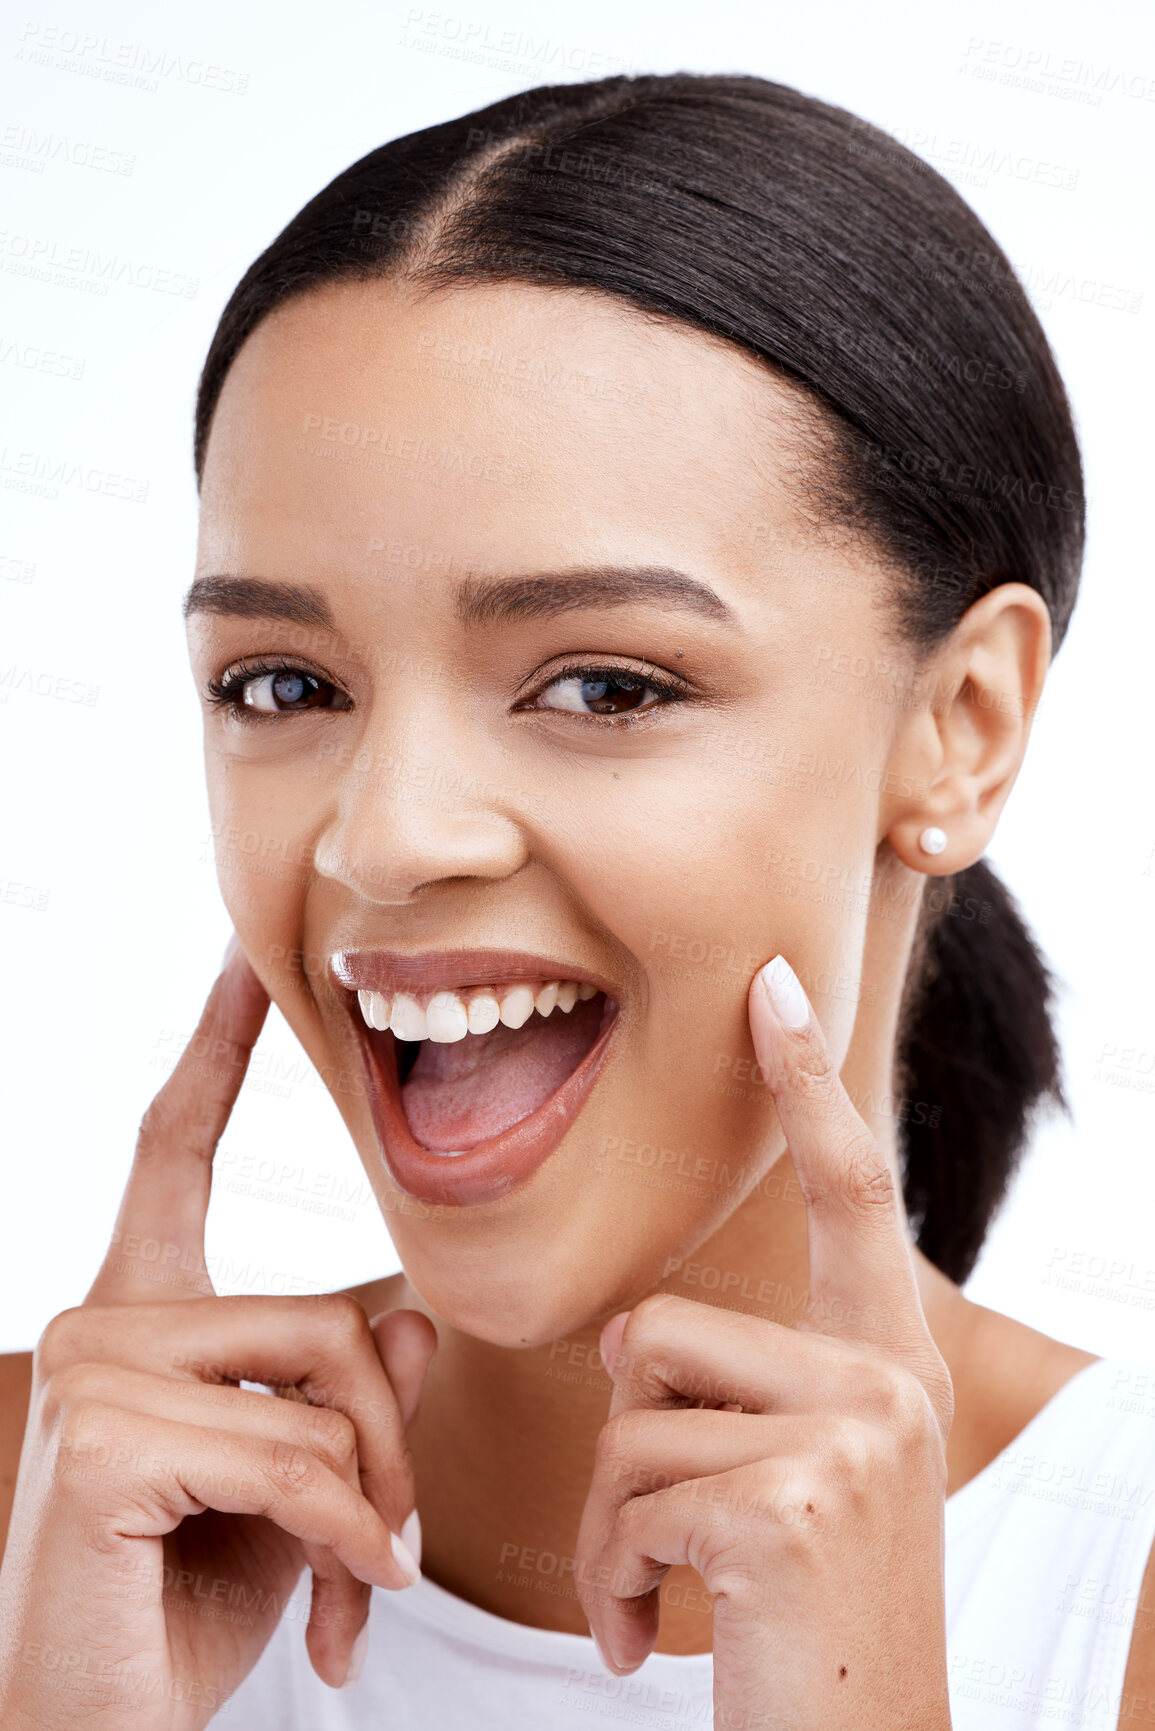 Buy stock photo Happy, gesture and portrait of a woman for beauty isolated on a white background in a studio. Smile, skincare and face of a young model looking confident about clear complexion and smooth skin